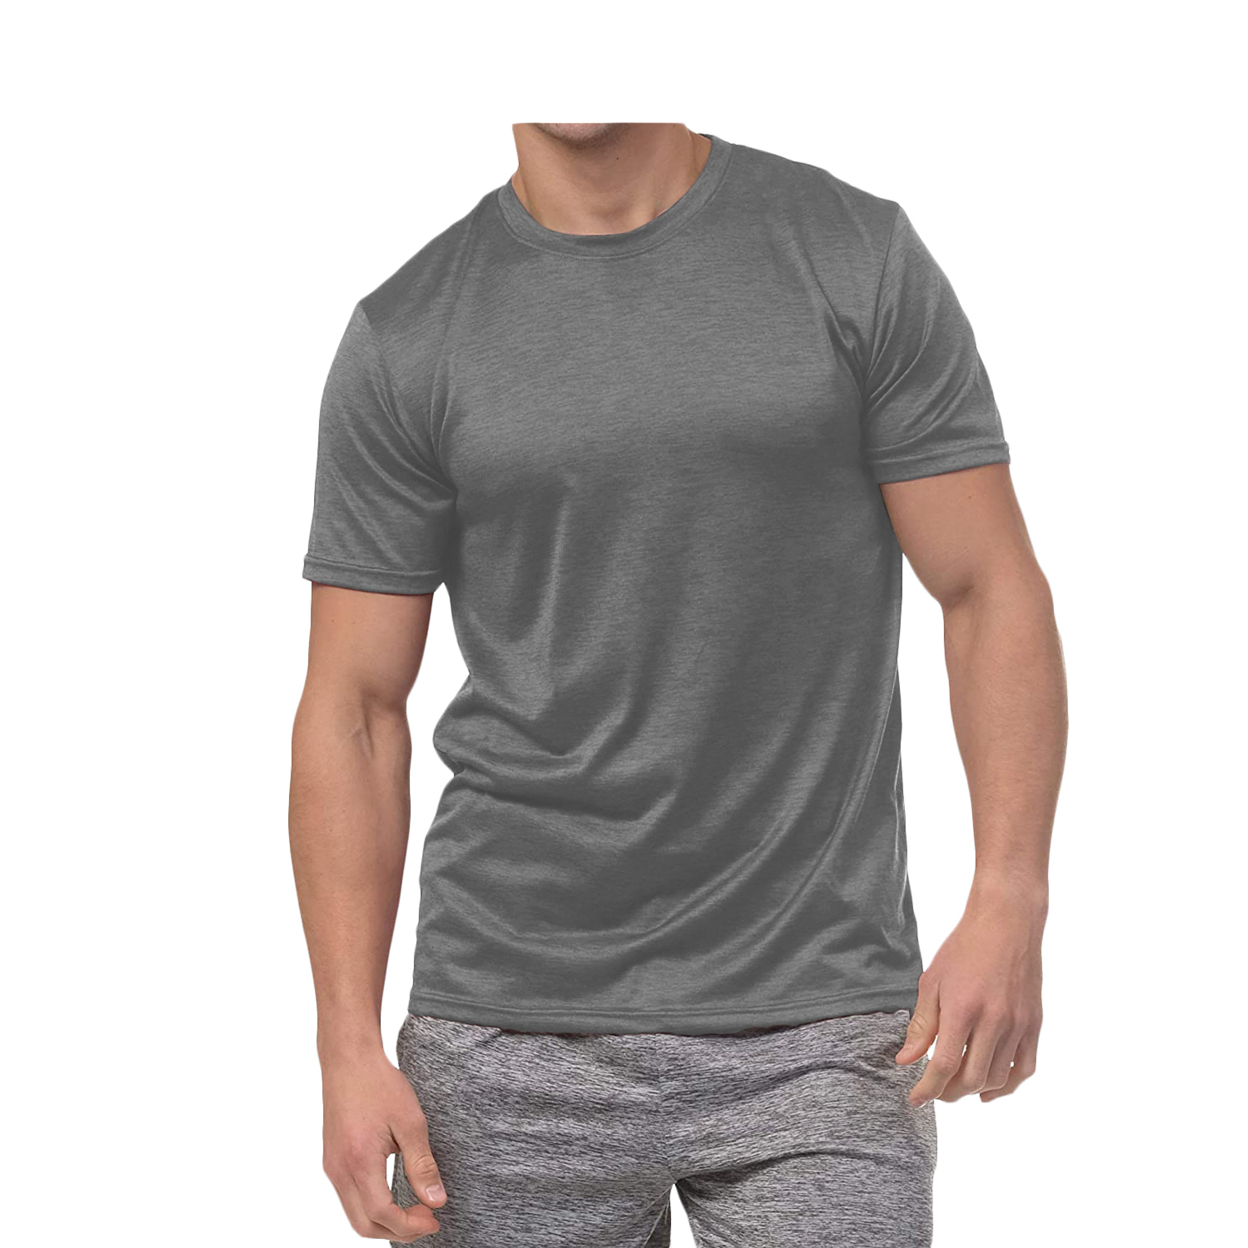 5-Pack: Men's Active Moisture Wicking Dry Fit Crew Neck Shirts - Small